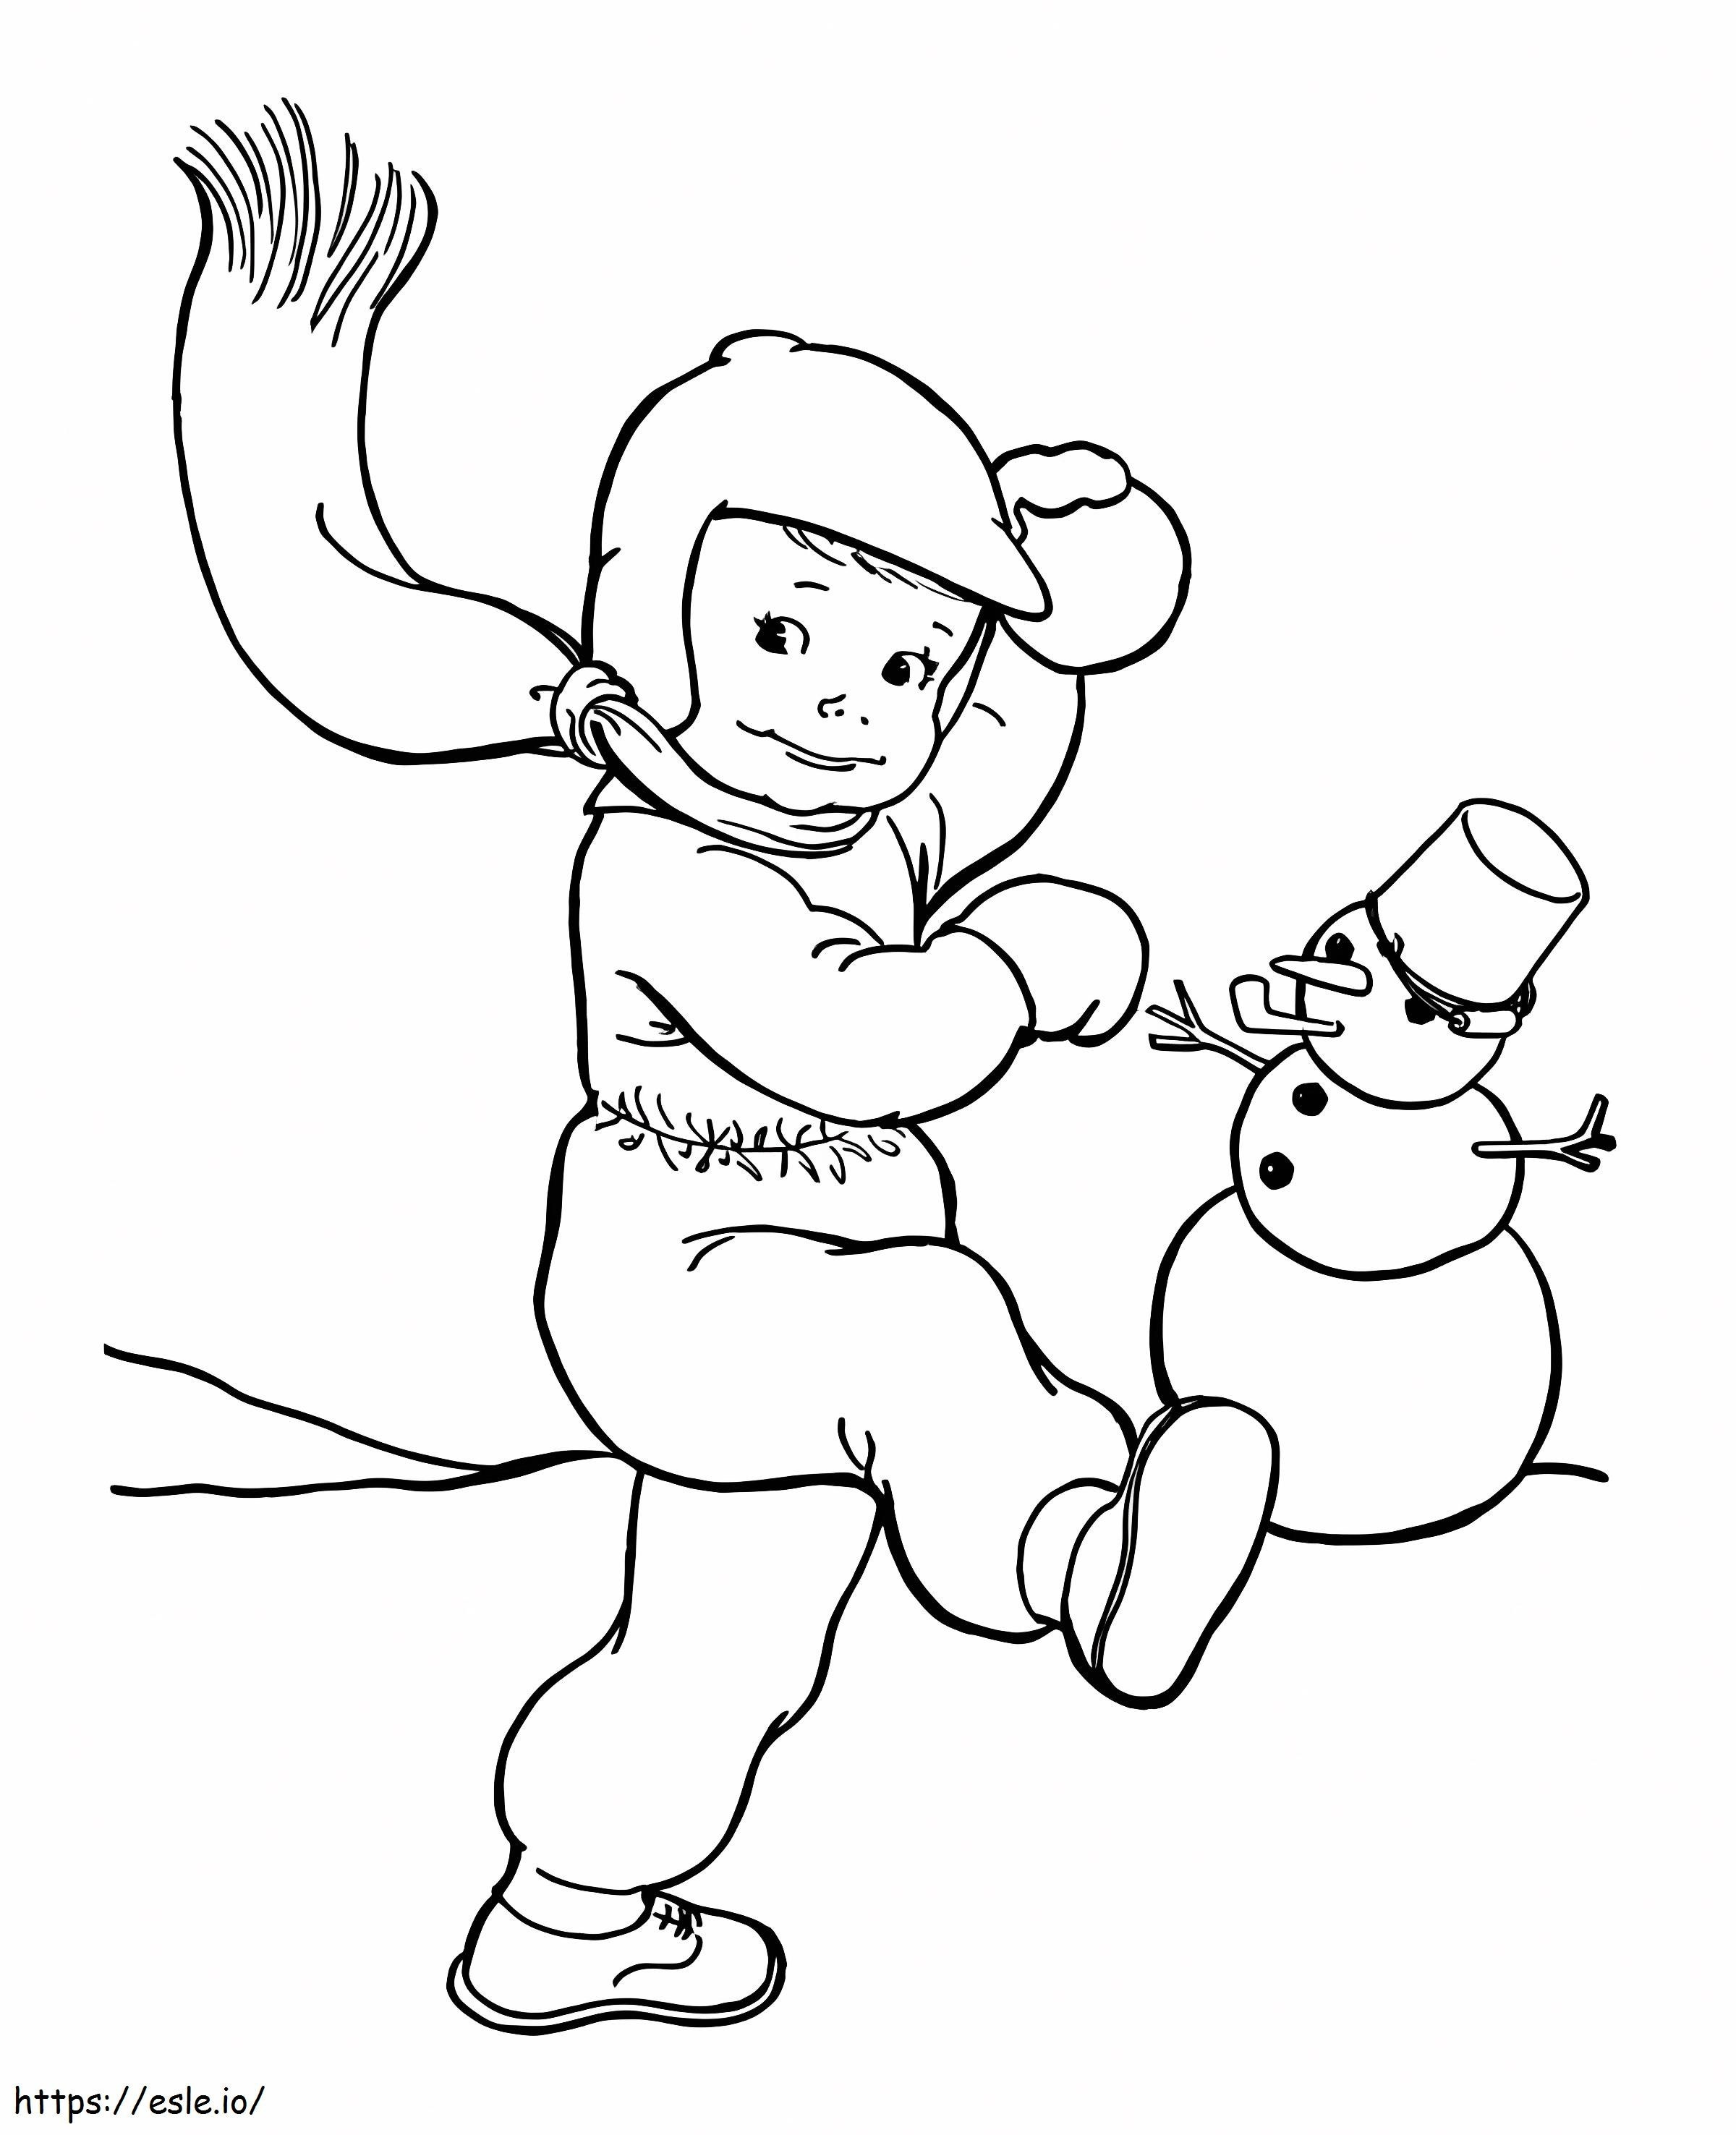 Print Snowball Fight coloring page